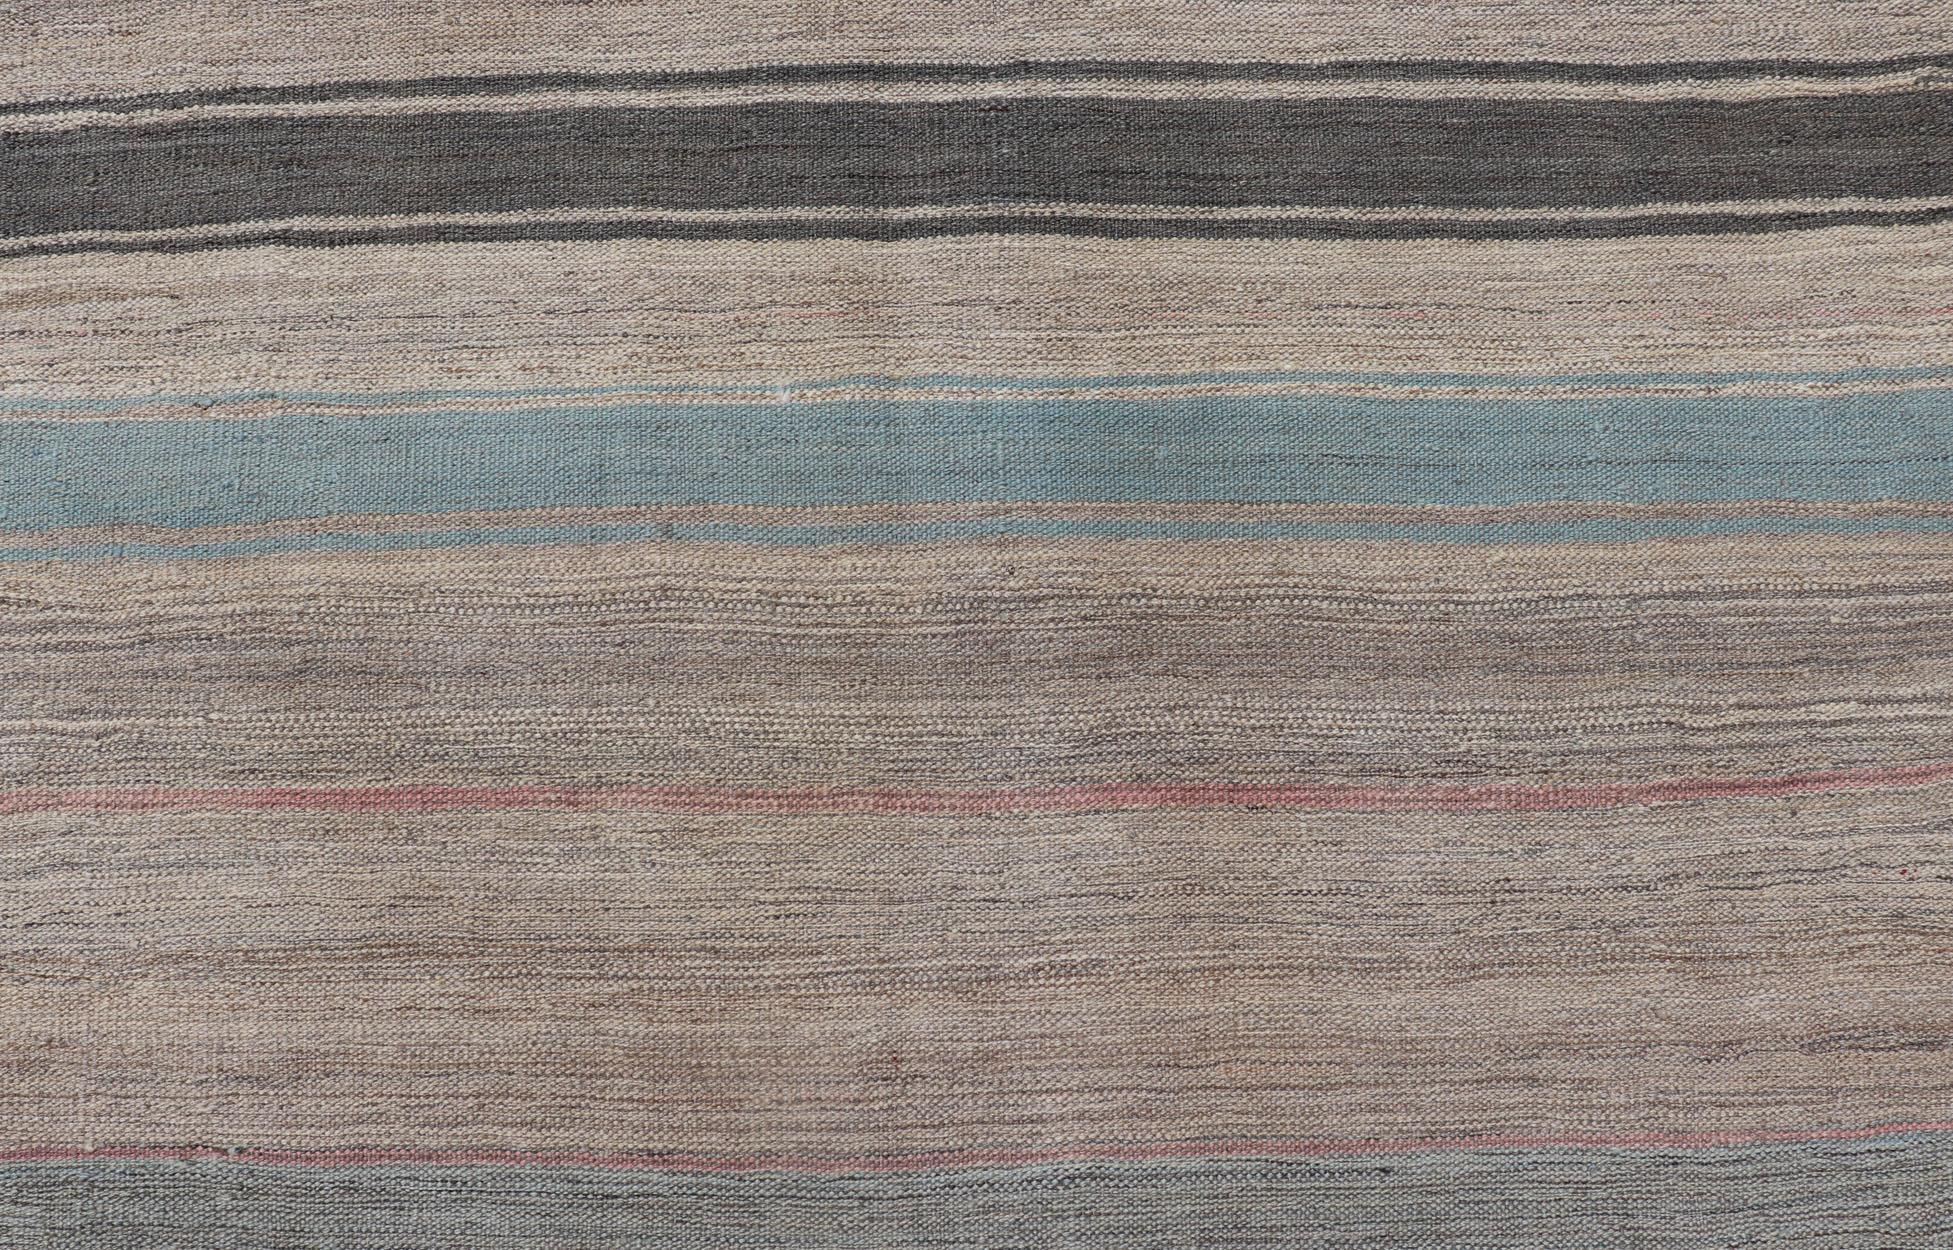 Modern Kilim Rug with Large Stripes in Shades of Blue, Taupe, Gray For Sale 4